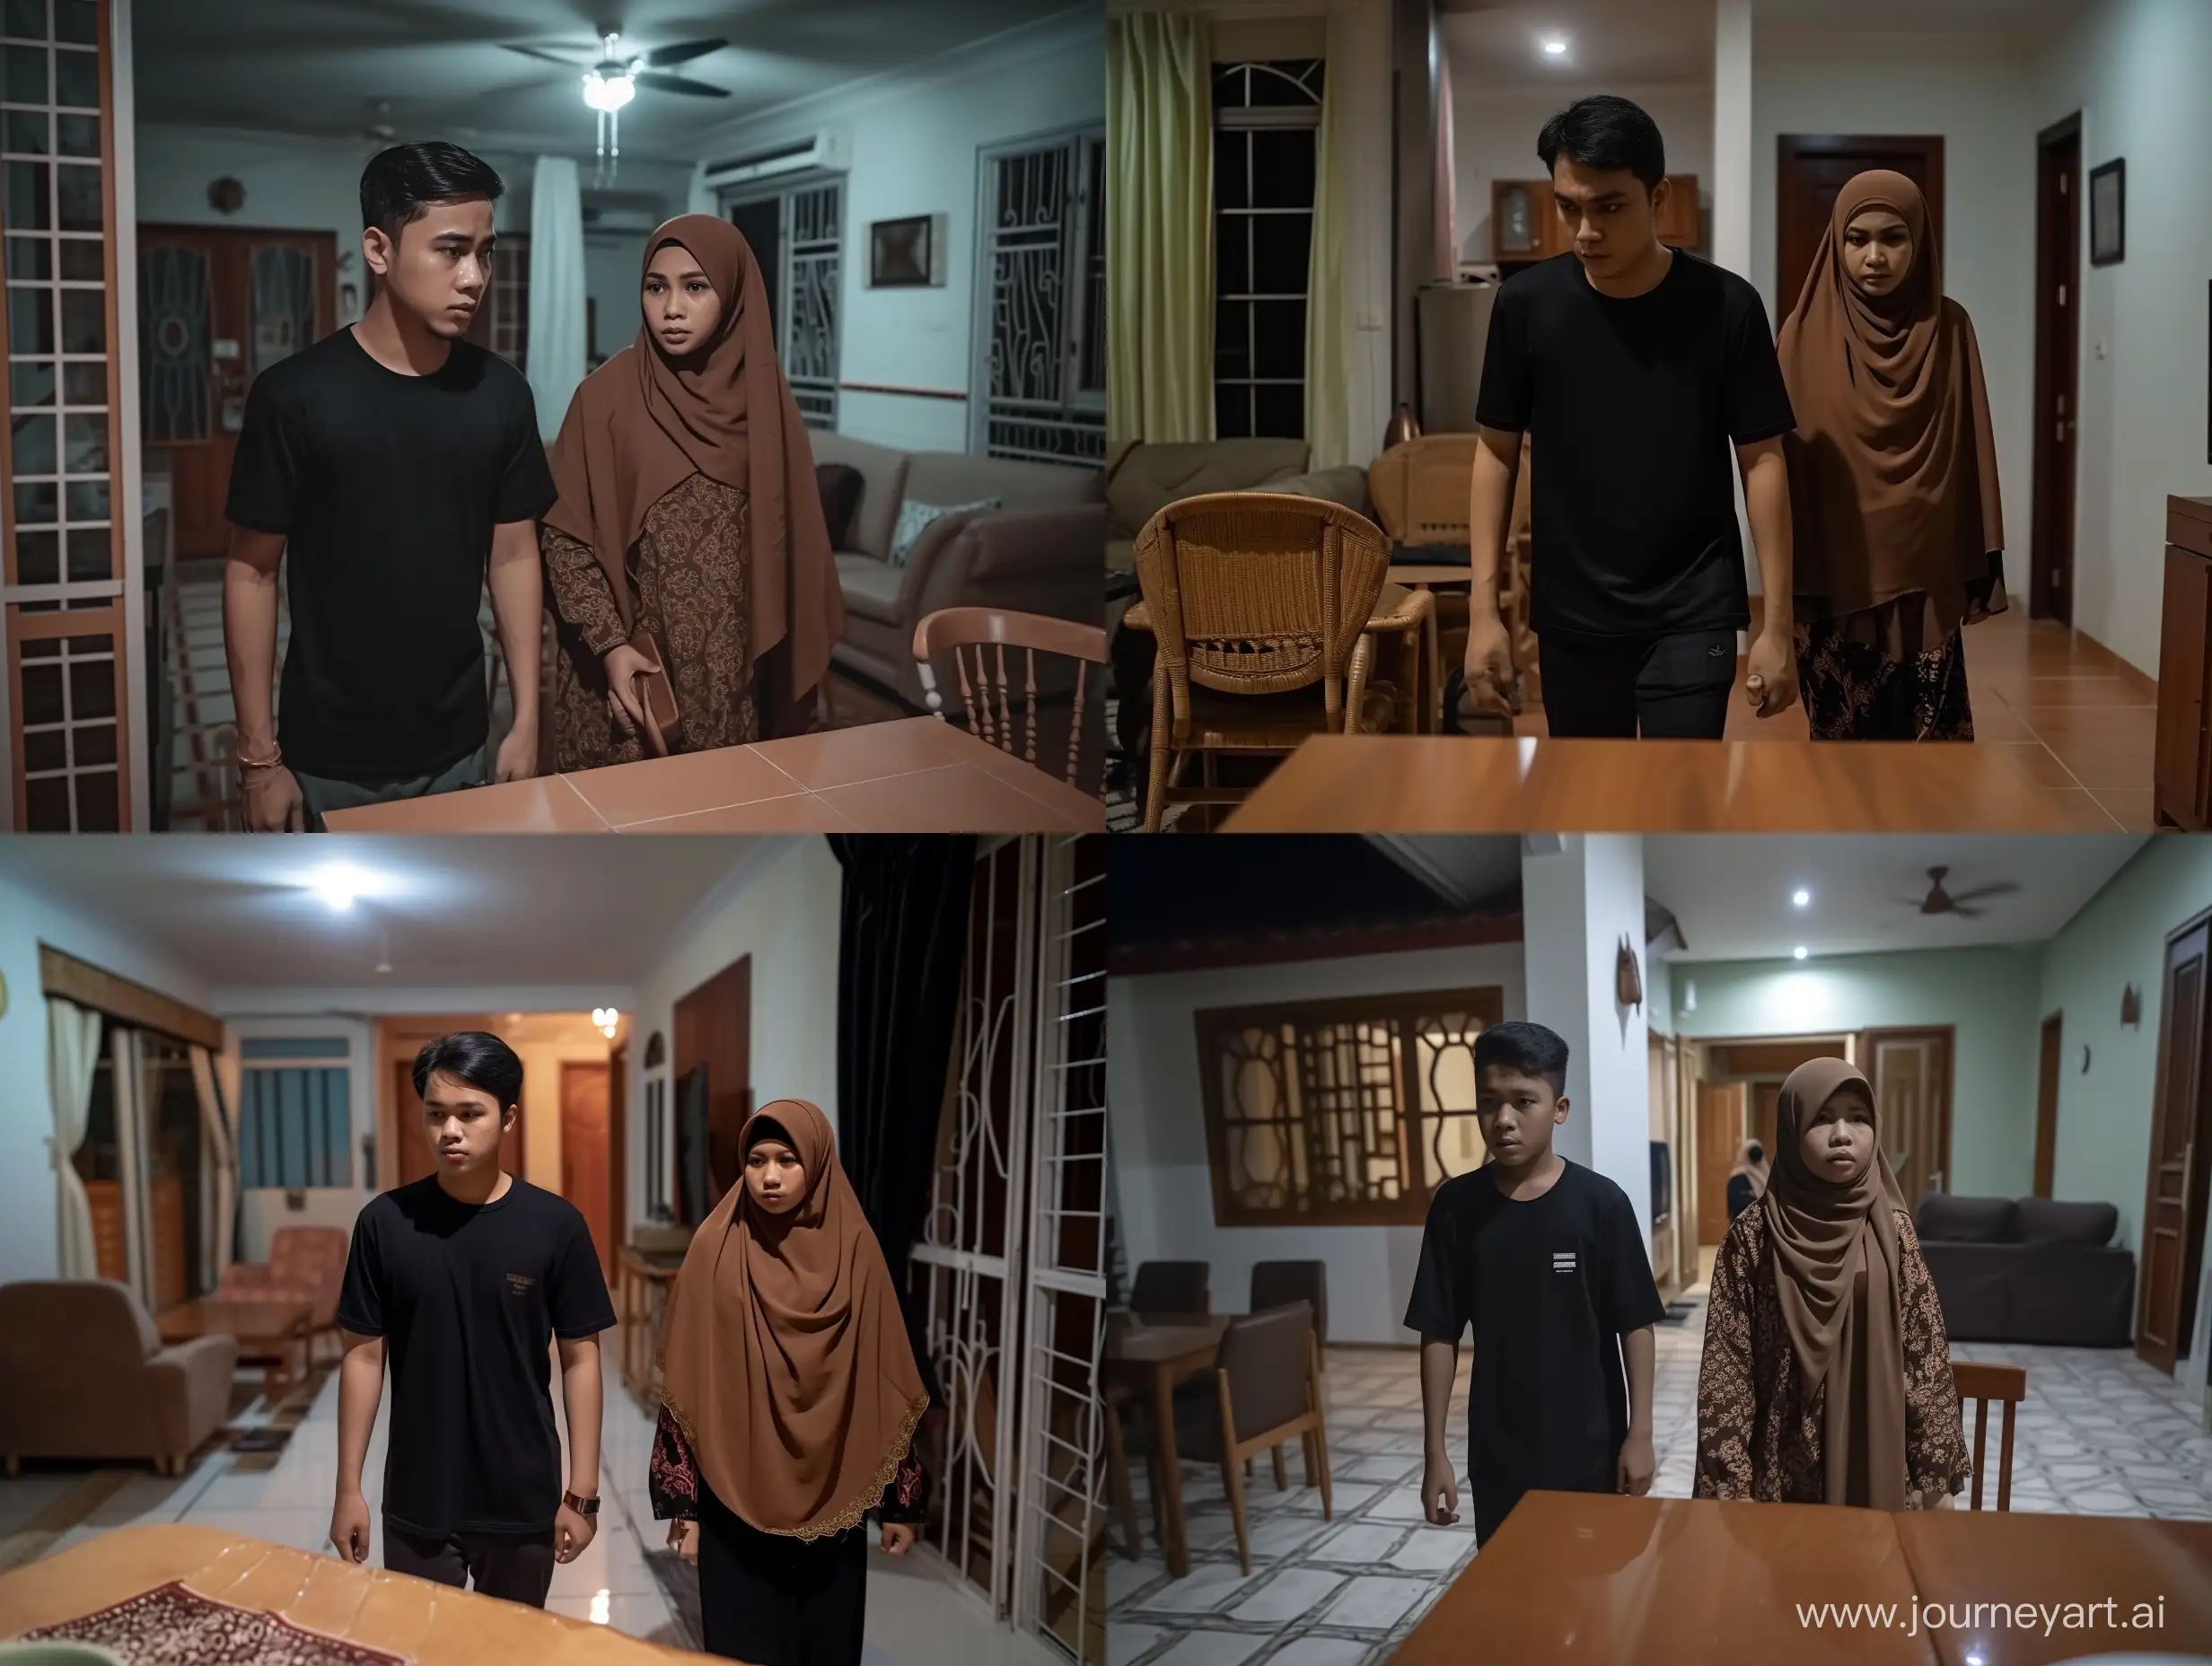 A 30 year old young man wearing a black t-shirt and a 29 year old Indonesian woman wearing a brown hijab enter a simple house, with a dining table in the foreground. This room is equipped with chairs and sofas. at night,  Front view,  horror movie scene